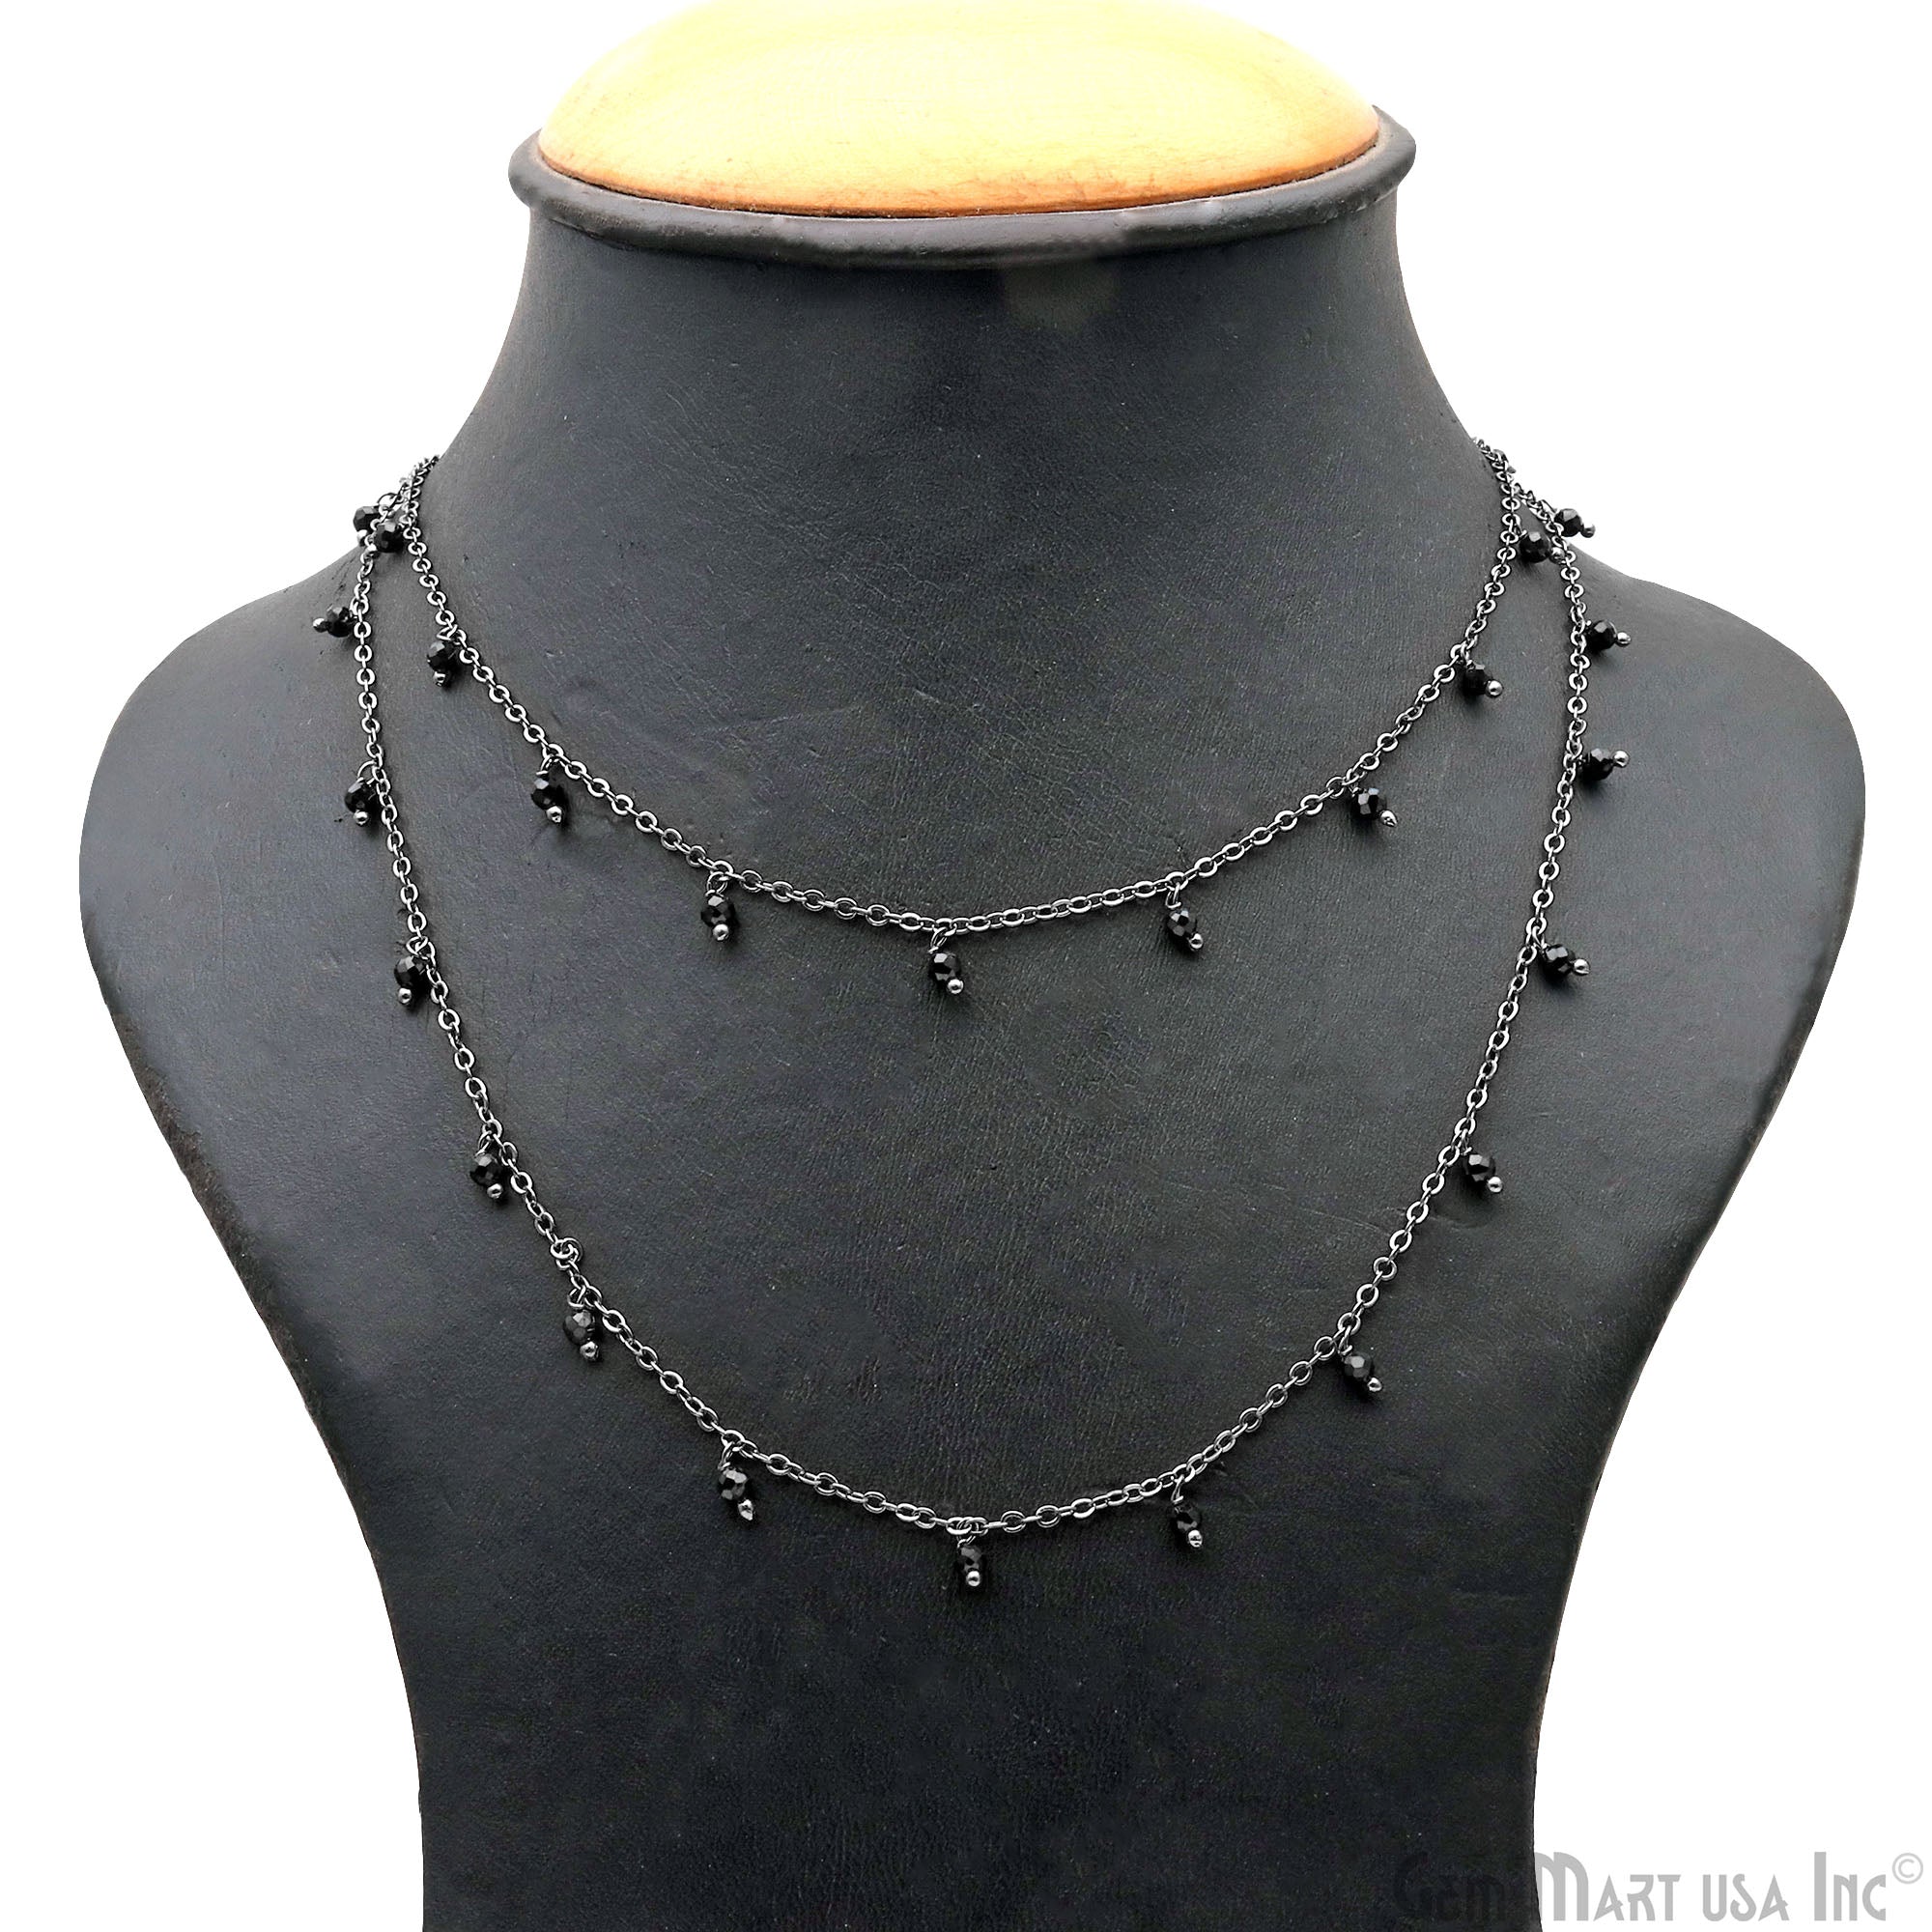 Black Spinel Faceted Beads 3-4mm Oxidized Cluster Dangle Chain